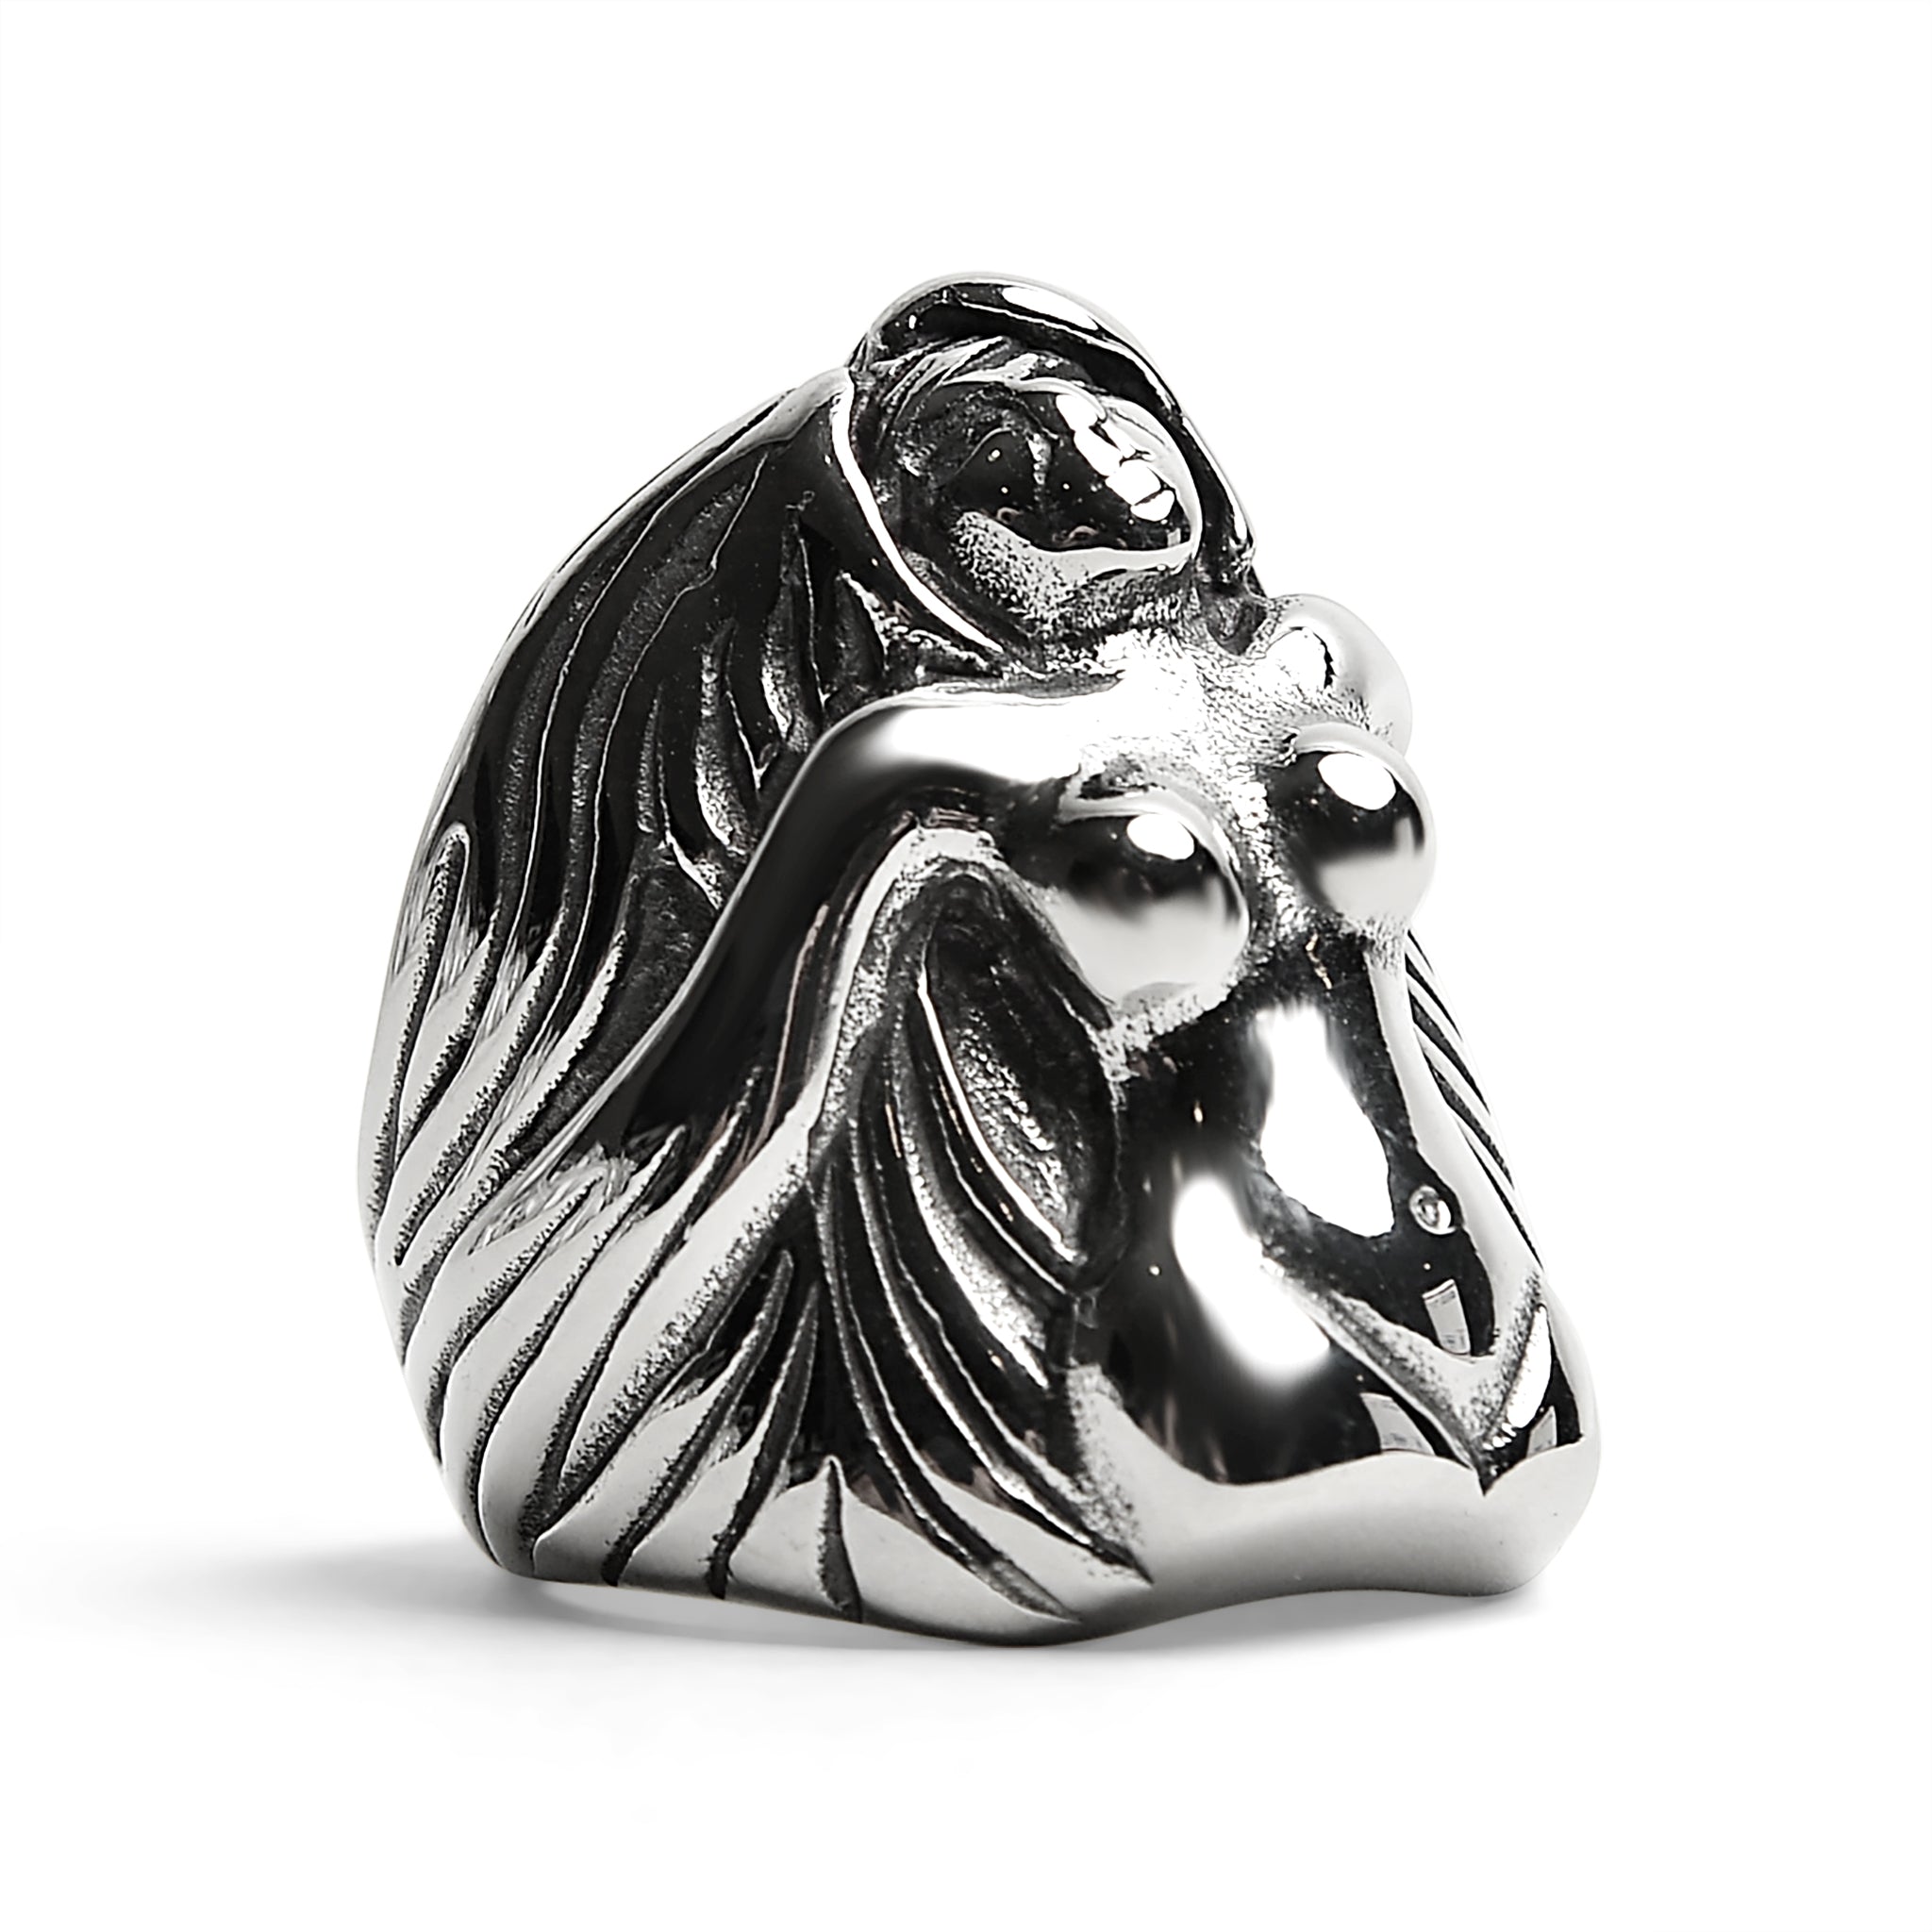 Stainless Steel Nude Goddess Ring - Sensual and Durable Jewelry for Everyday Wear - Jewelry & Watches - Bijou Her -  -  - 